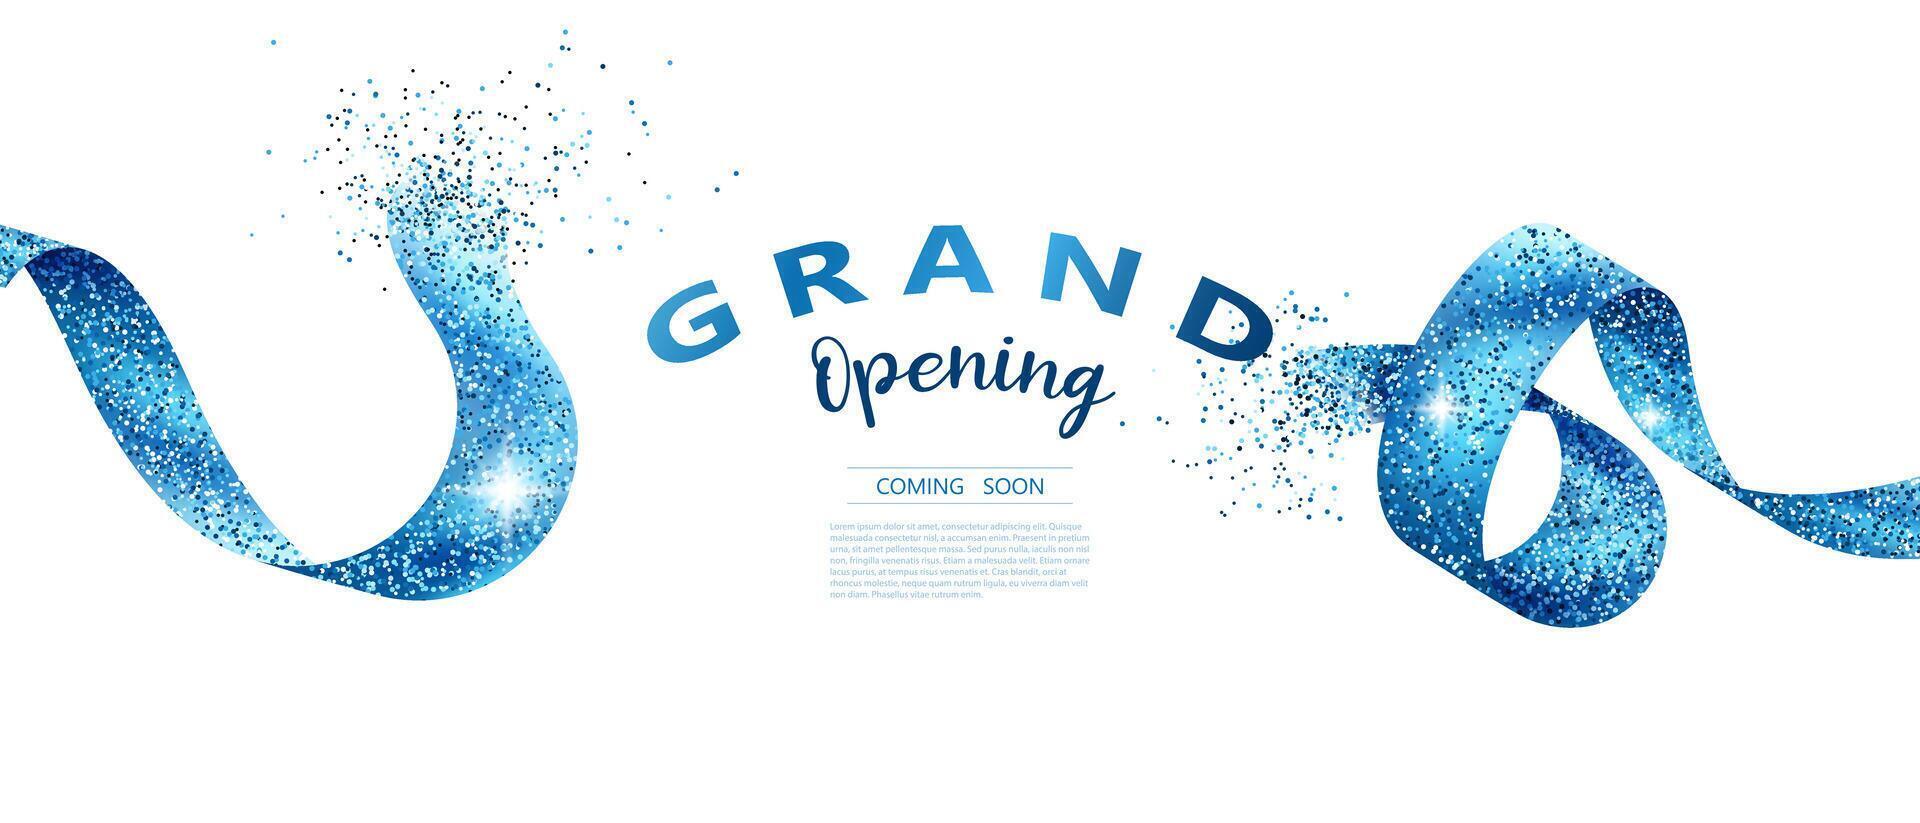 Design your opening card with vector illustrations. elegant business banner template